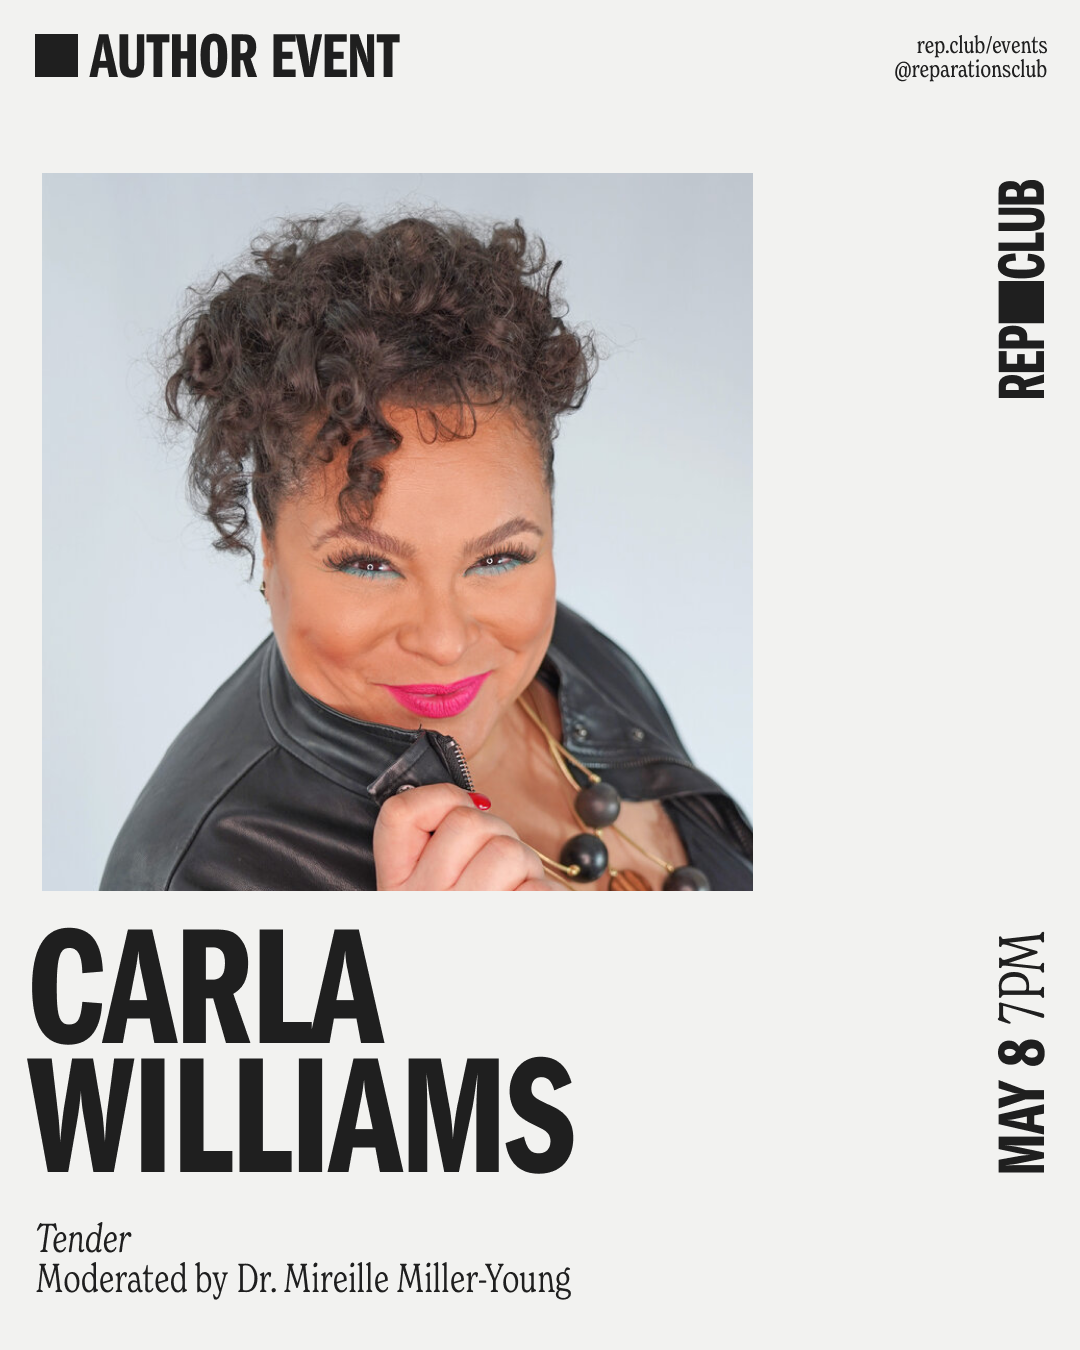 May 8th EVENT: Tender // Carla Williams + Dr. Mireille Miller-Young